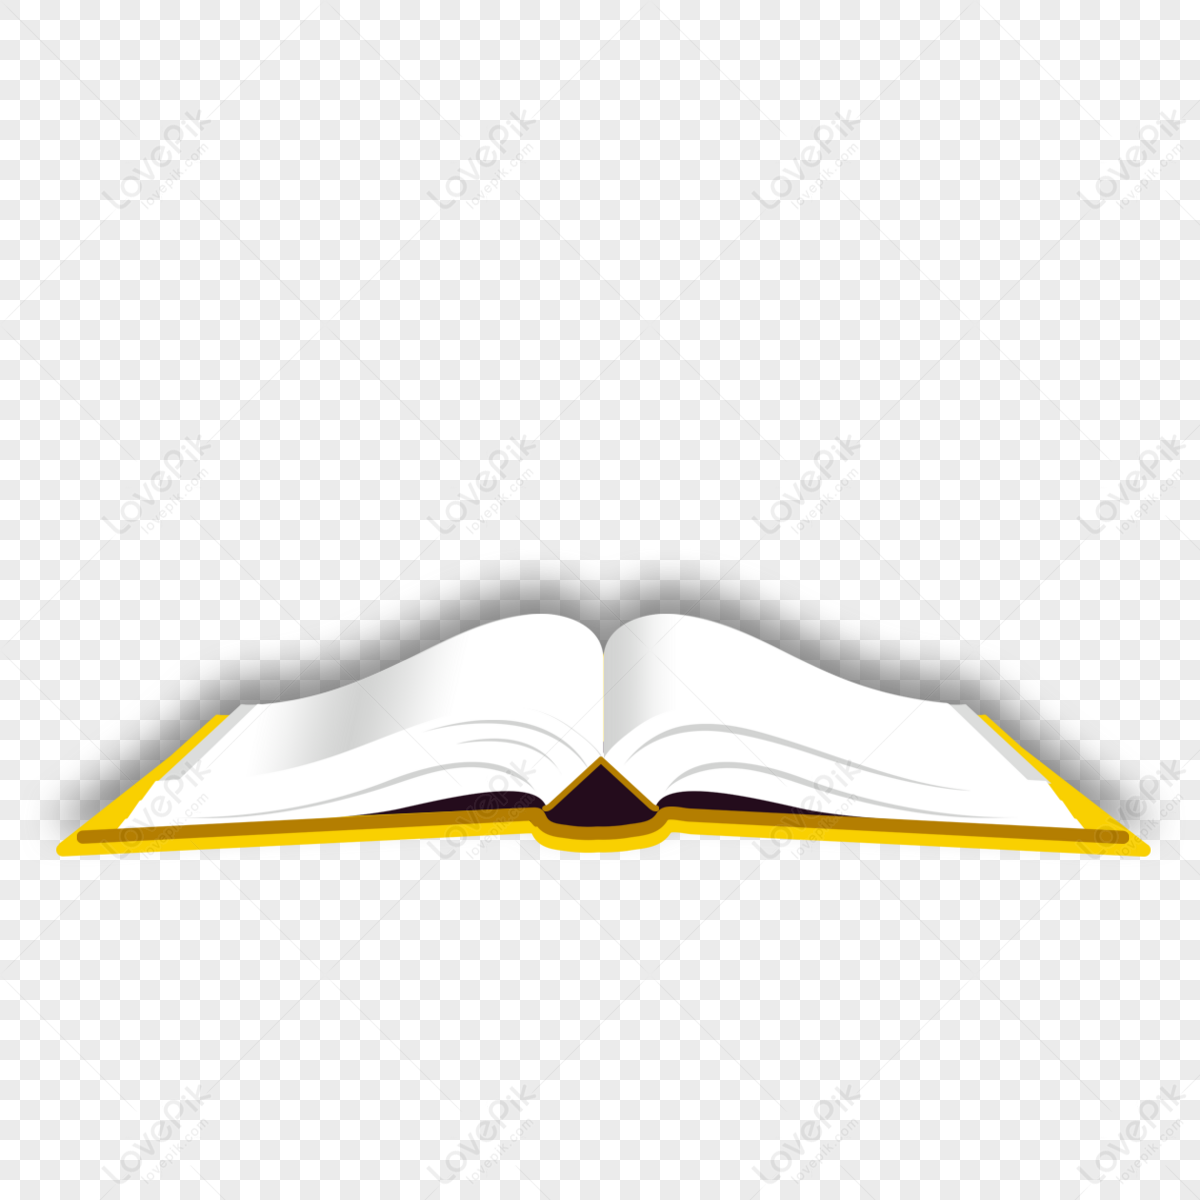 spread out office stationery books books,student supplies,stationery cartoon png hd transparent image